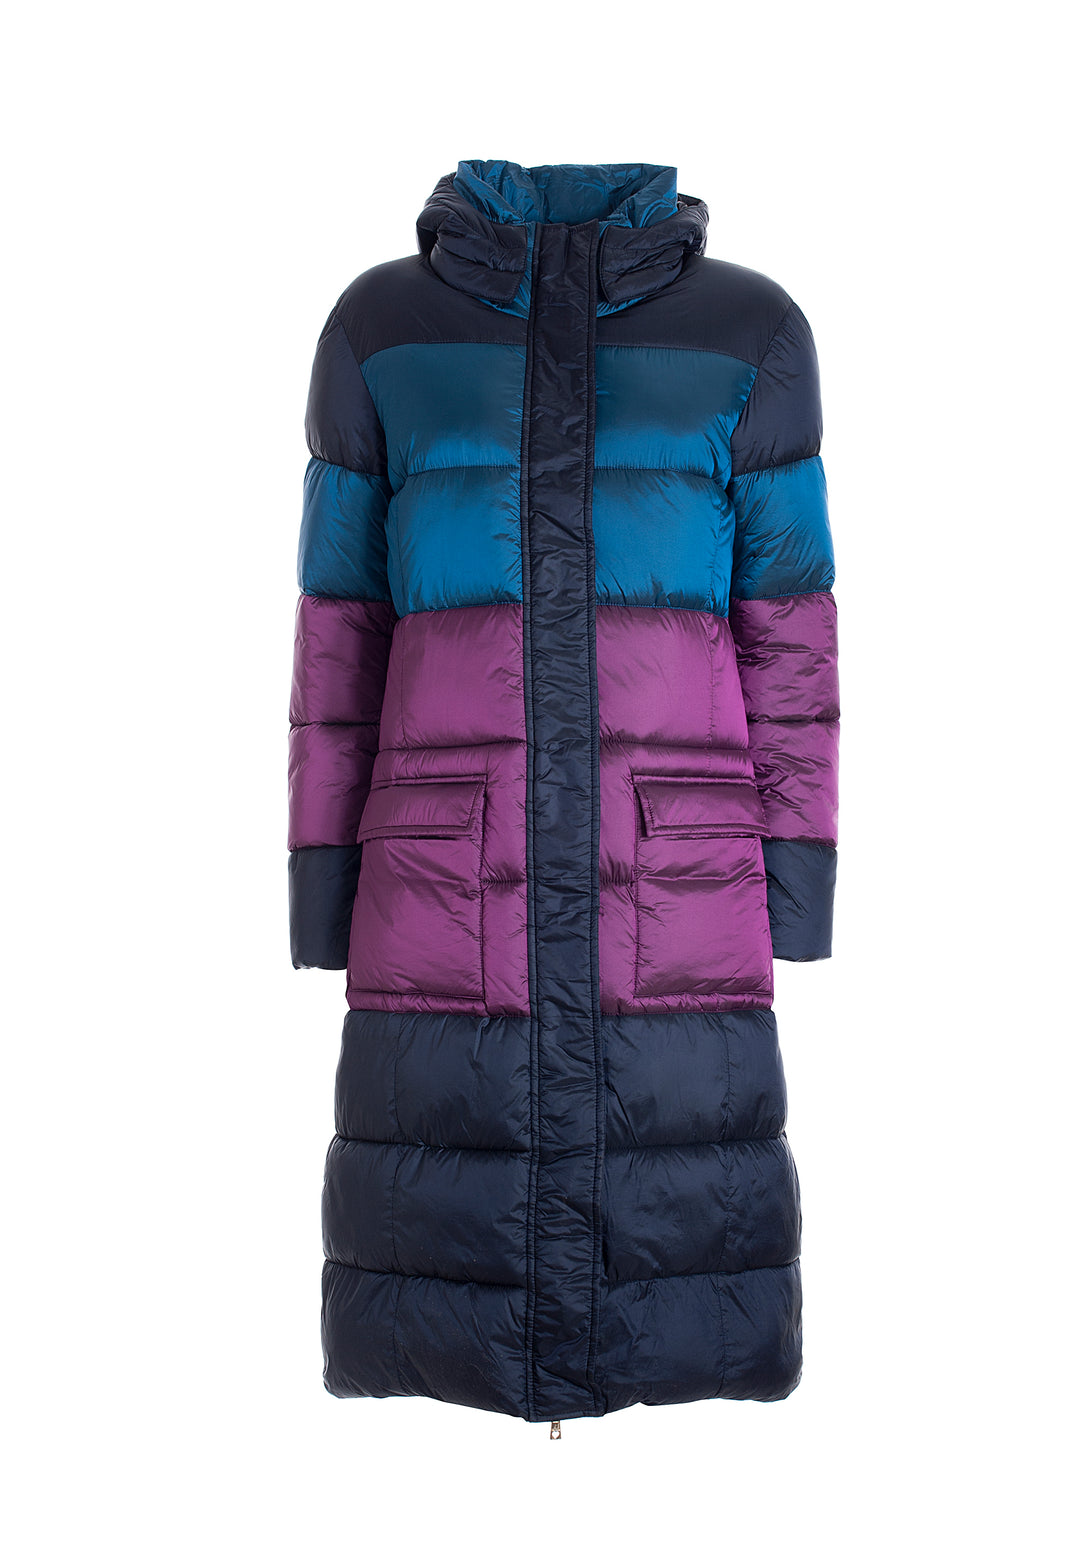 Padded jacket regular fit, long, made in multicolor quilted nylon